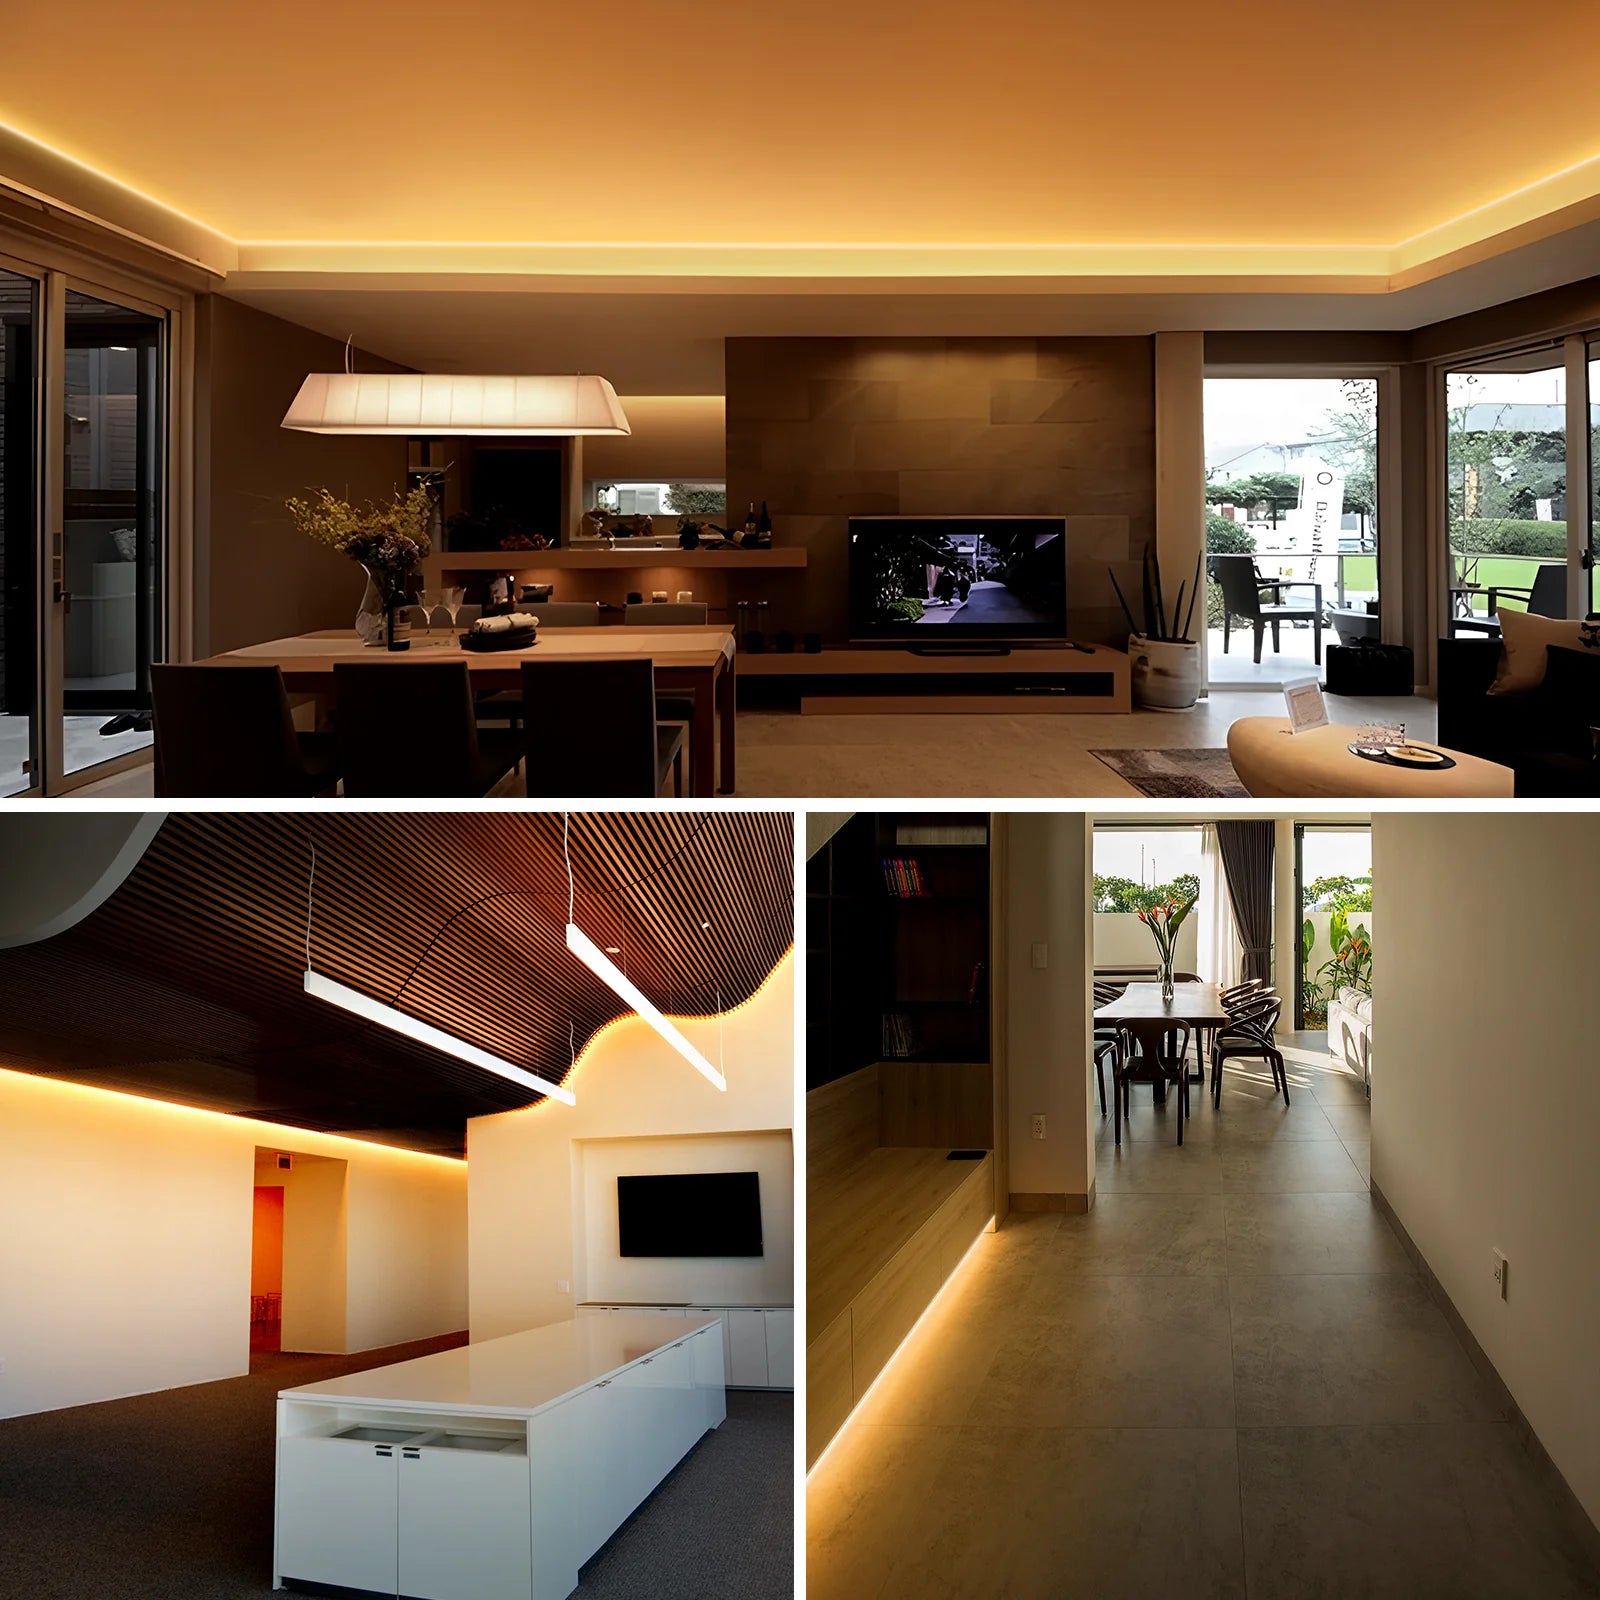 510 Lumen 110V Super Bright LED Strip Lights for Indoor and Outdoor Use - Dimmable, CCT Tunable, Easy to Install